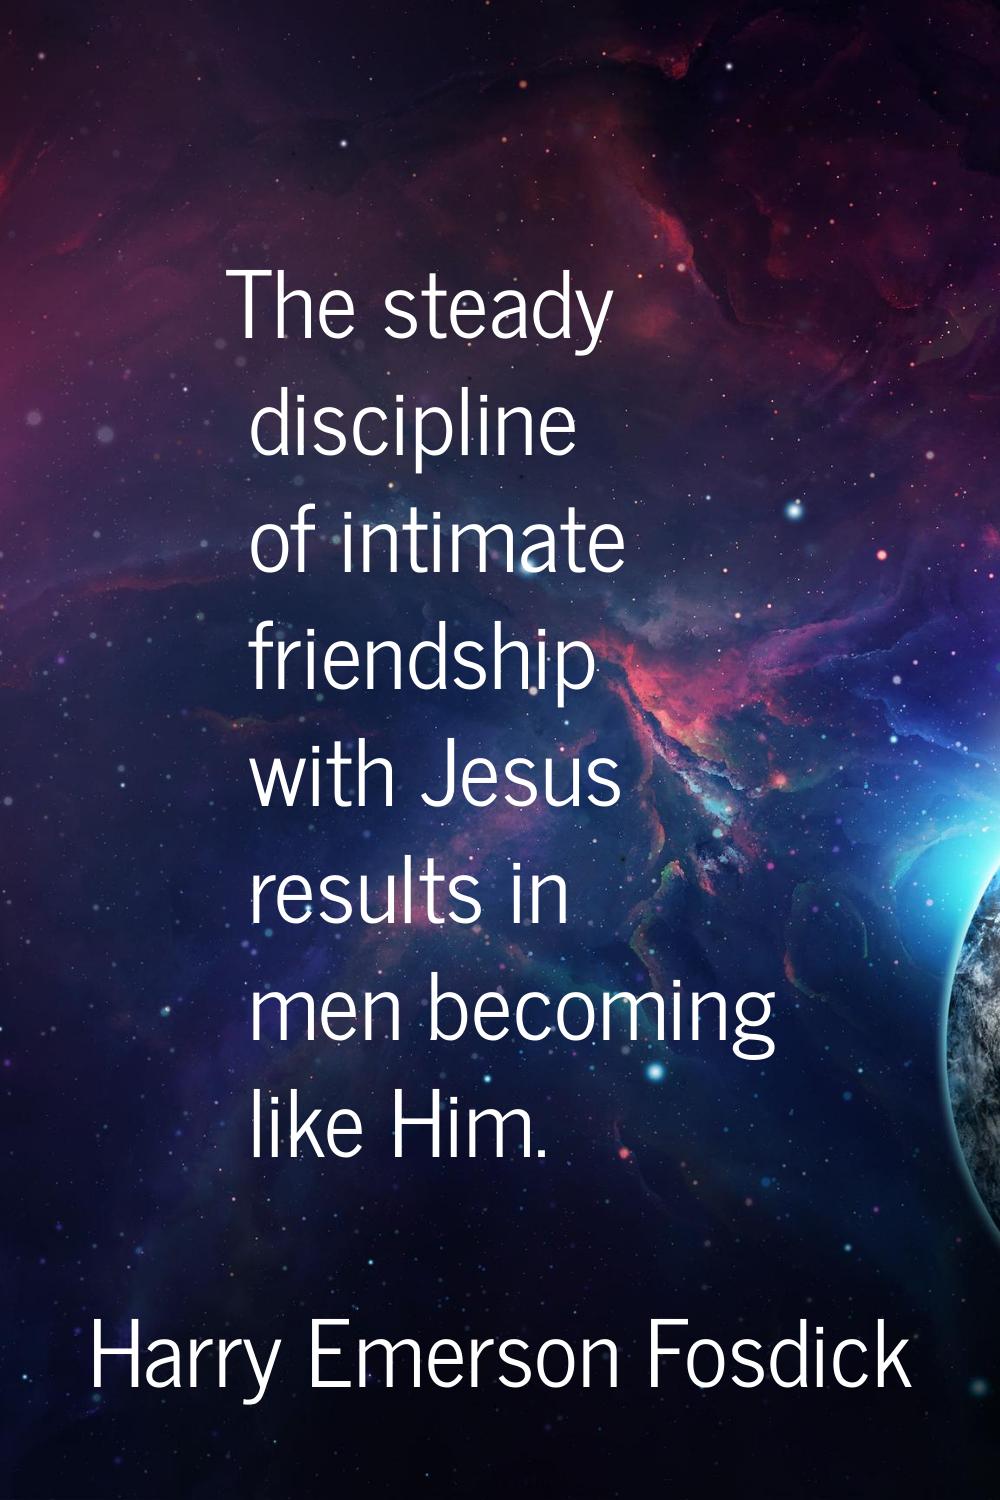 The steady discipline of intimate friendship with Jesus results in men becoming like Him.